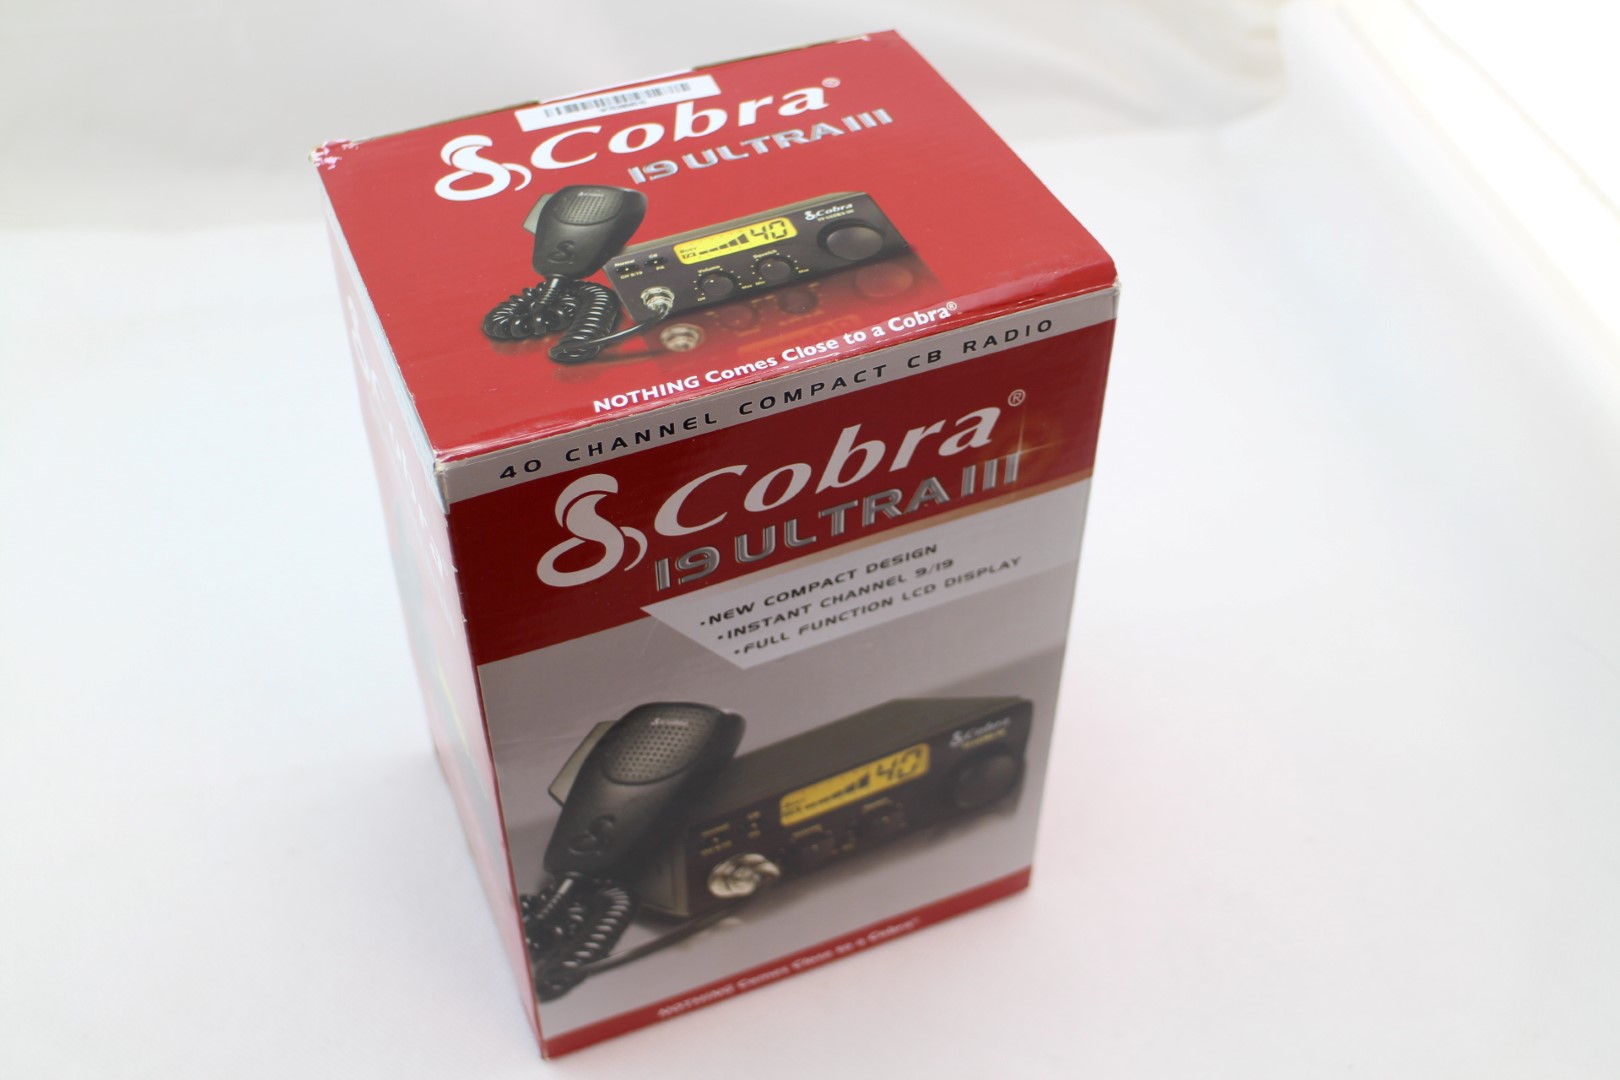 Cobra Electronics 19 Ultra III Compact Design CB Radio for Car, Truck or RV, 40 Channels & 40 hz Frequency - image 2 of 9